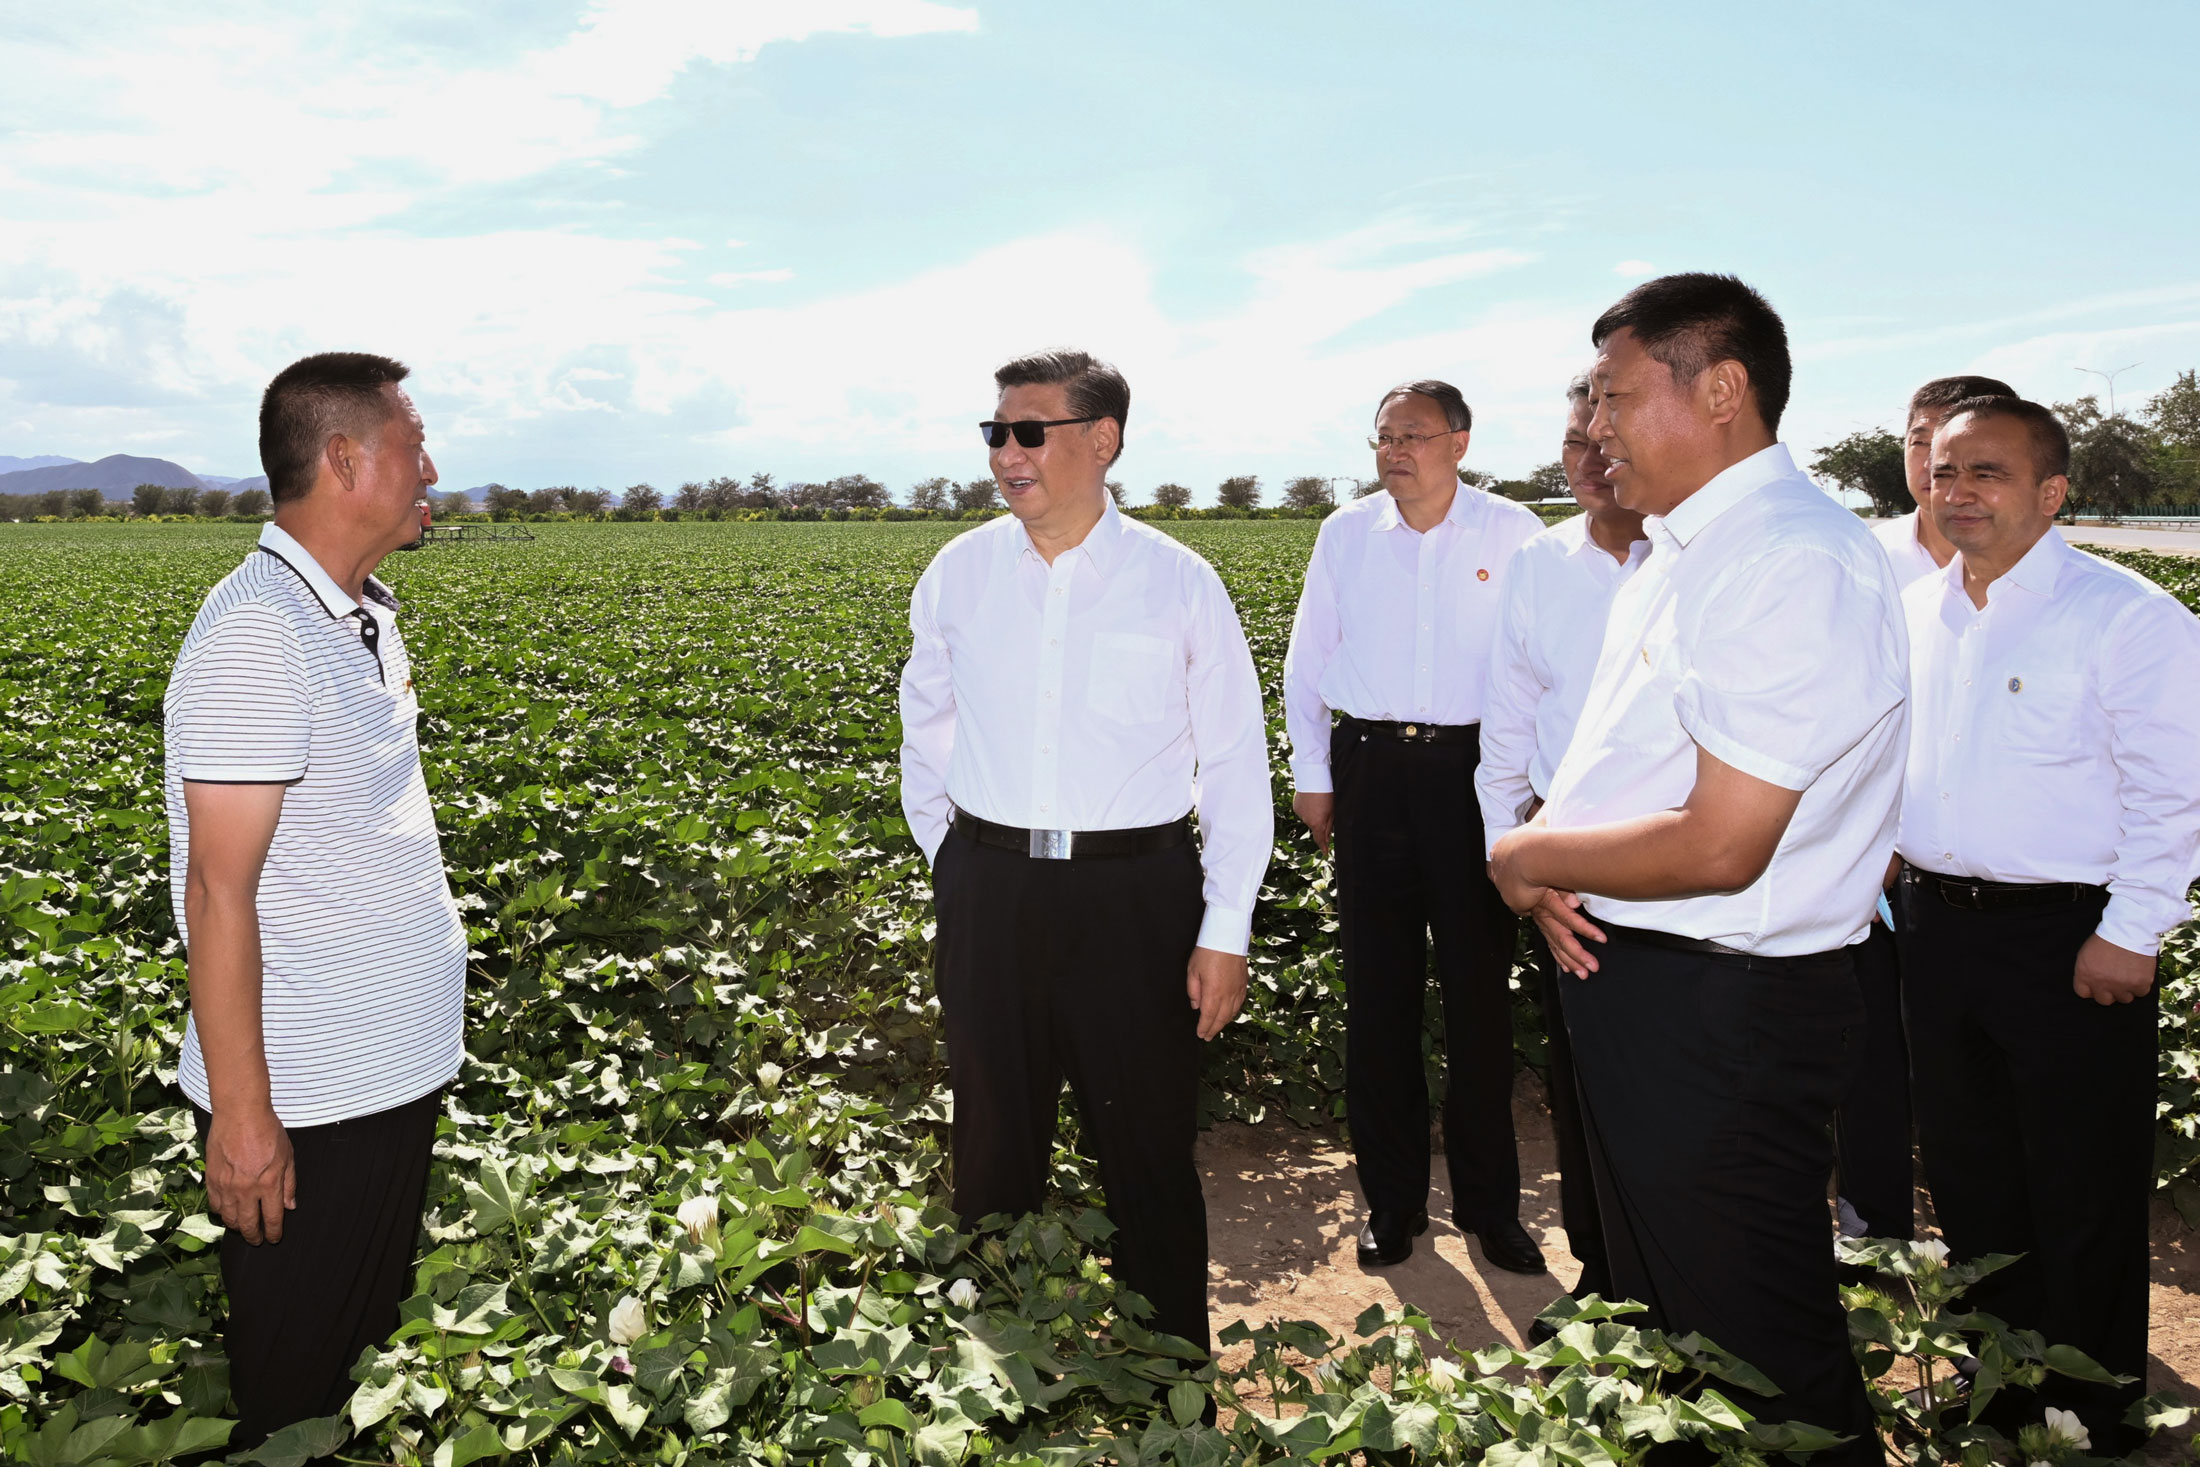 US Senators Ask Shein About Forced Labor Concerns for Its Cotton - BNN  Bloomberg